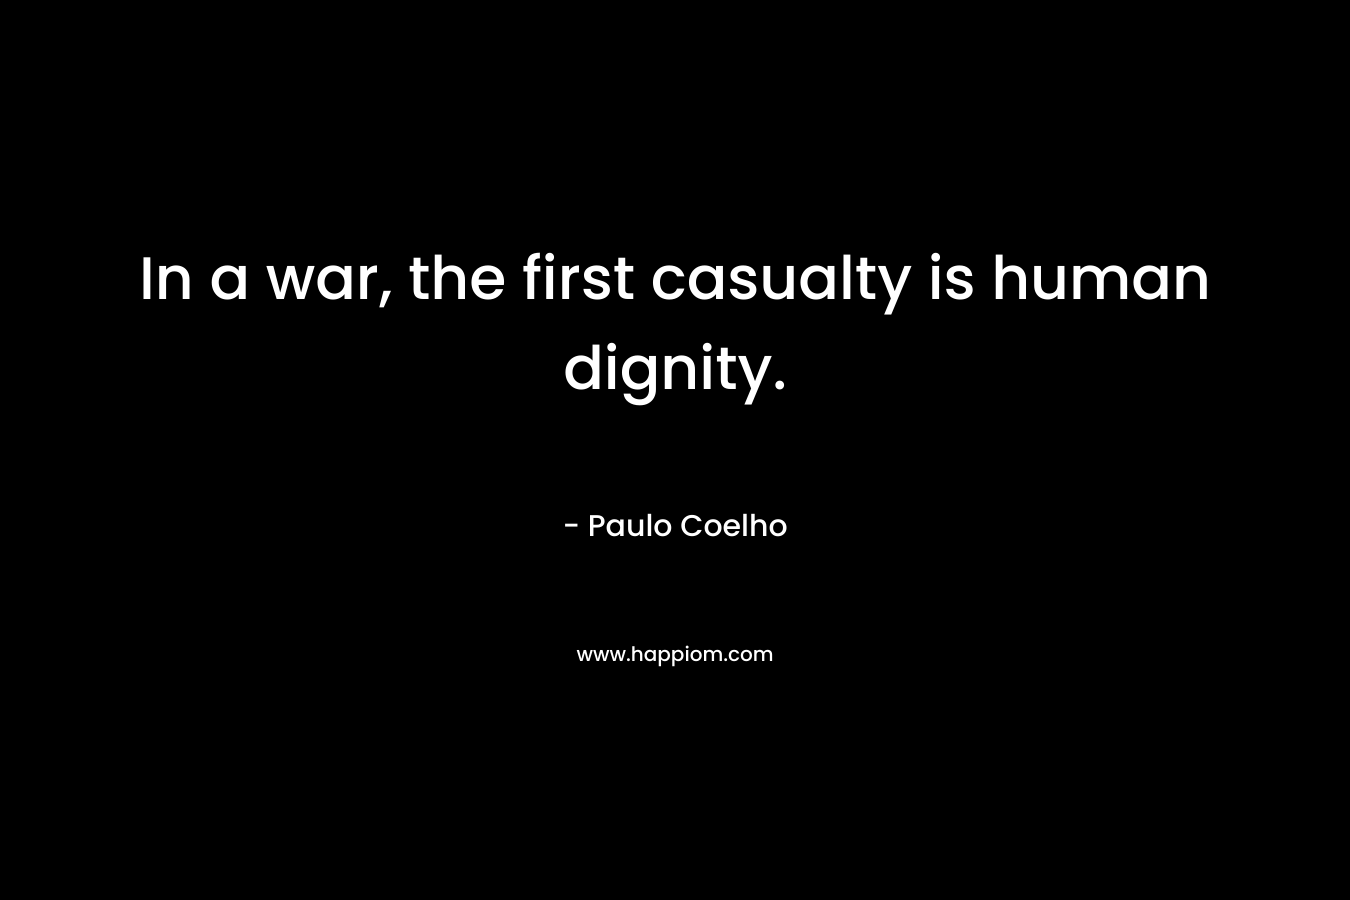 In a war, the first casualty is human dignity.